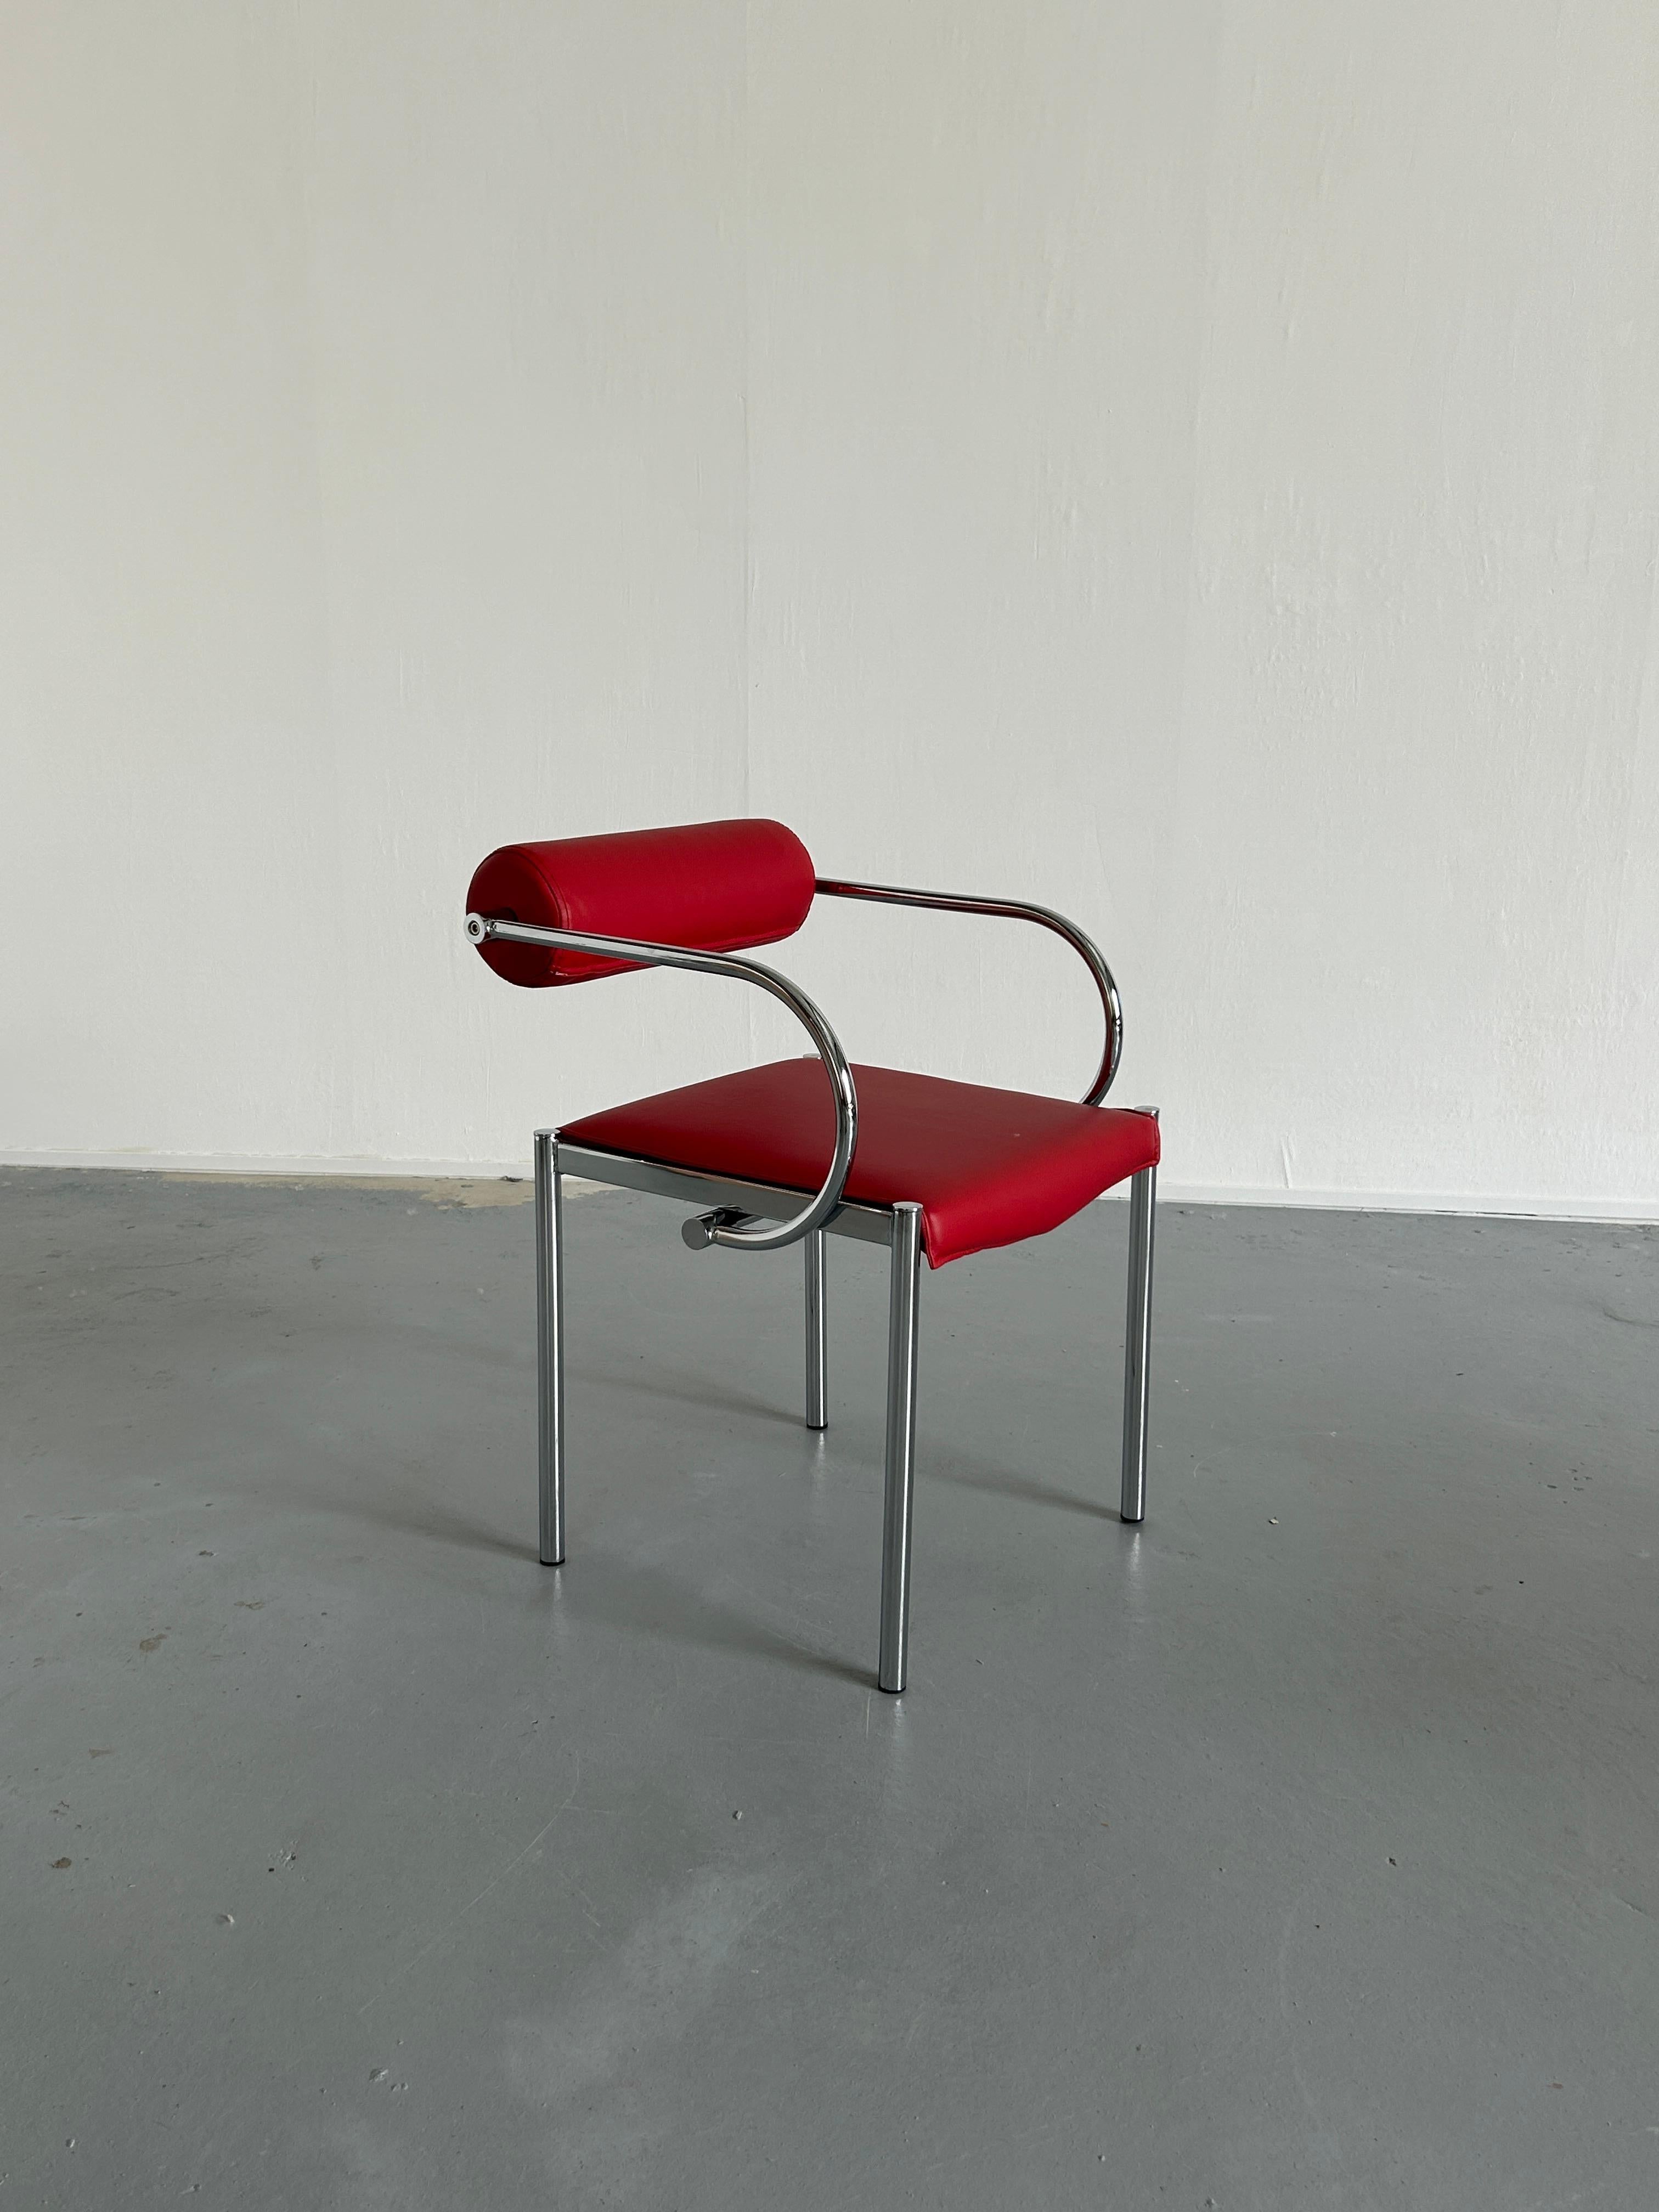 Late 20th Century Vintage Postmodern Tubular Chairs in the style of Arcadia Chairs by Paolo Piva